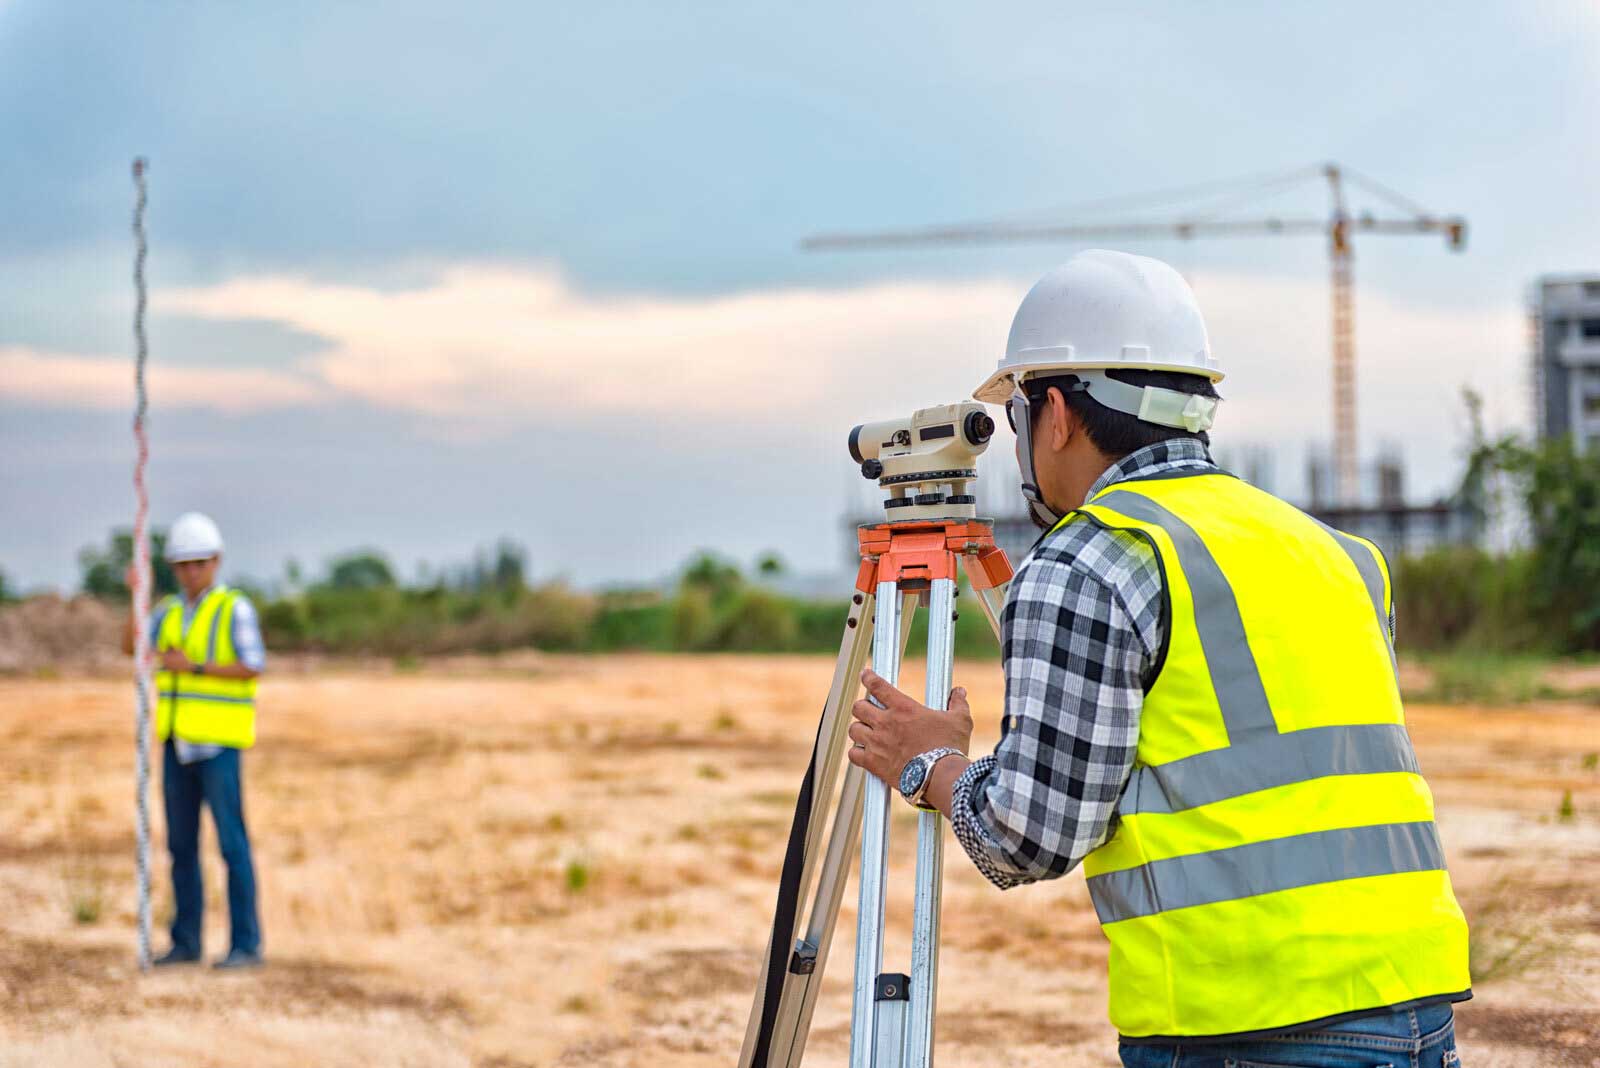 Two land surveyors wear yellow safety vests and hardhats while using land surveying equipment in the field